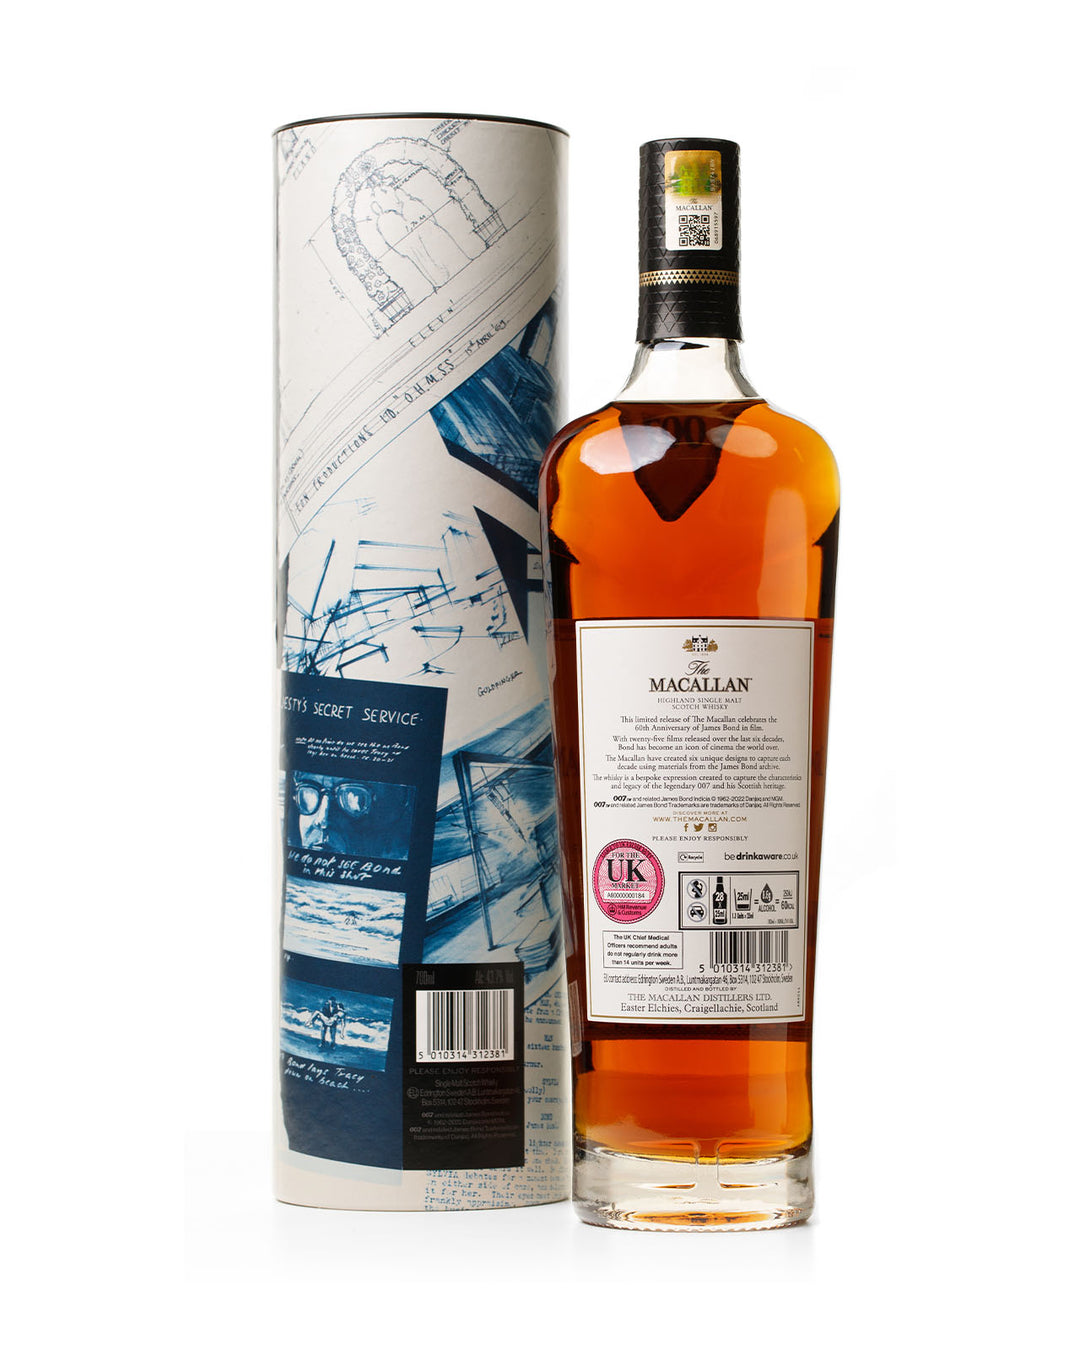 Macallan James Bond 60th Anniversary Release Decade I Bottled 2022 With Original Tube